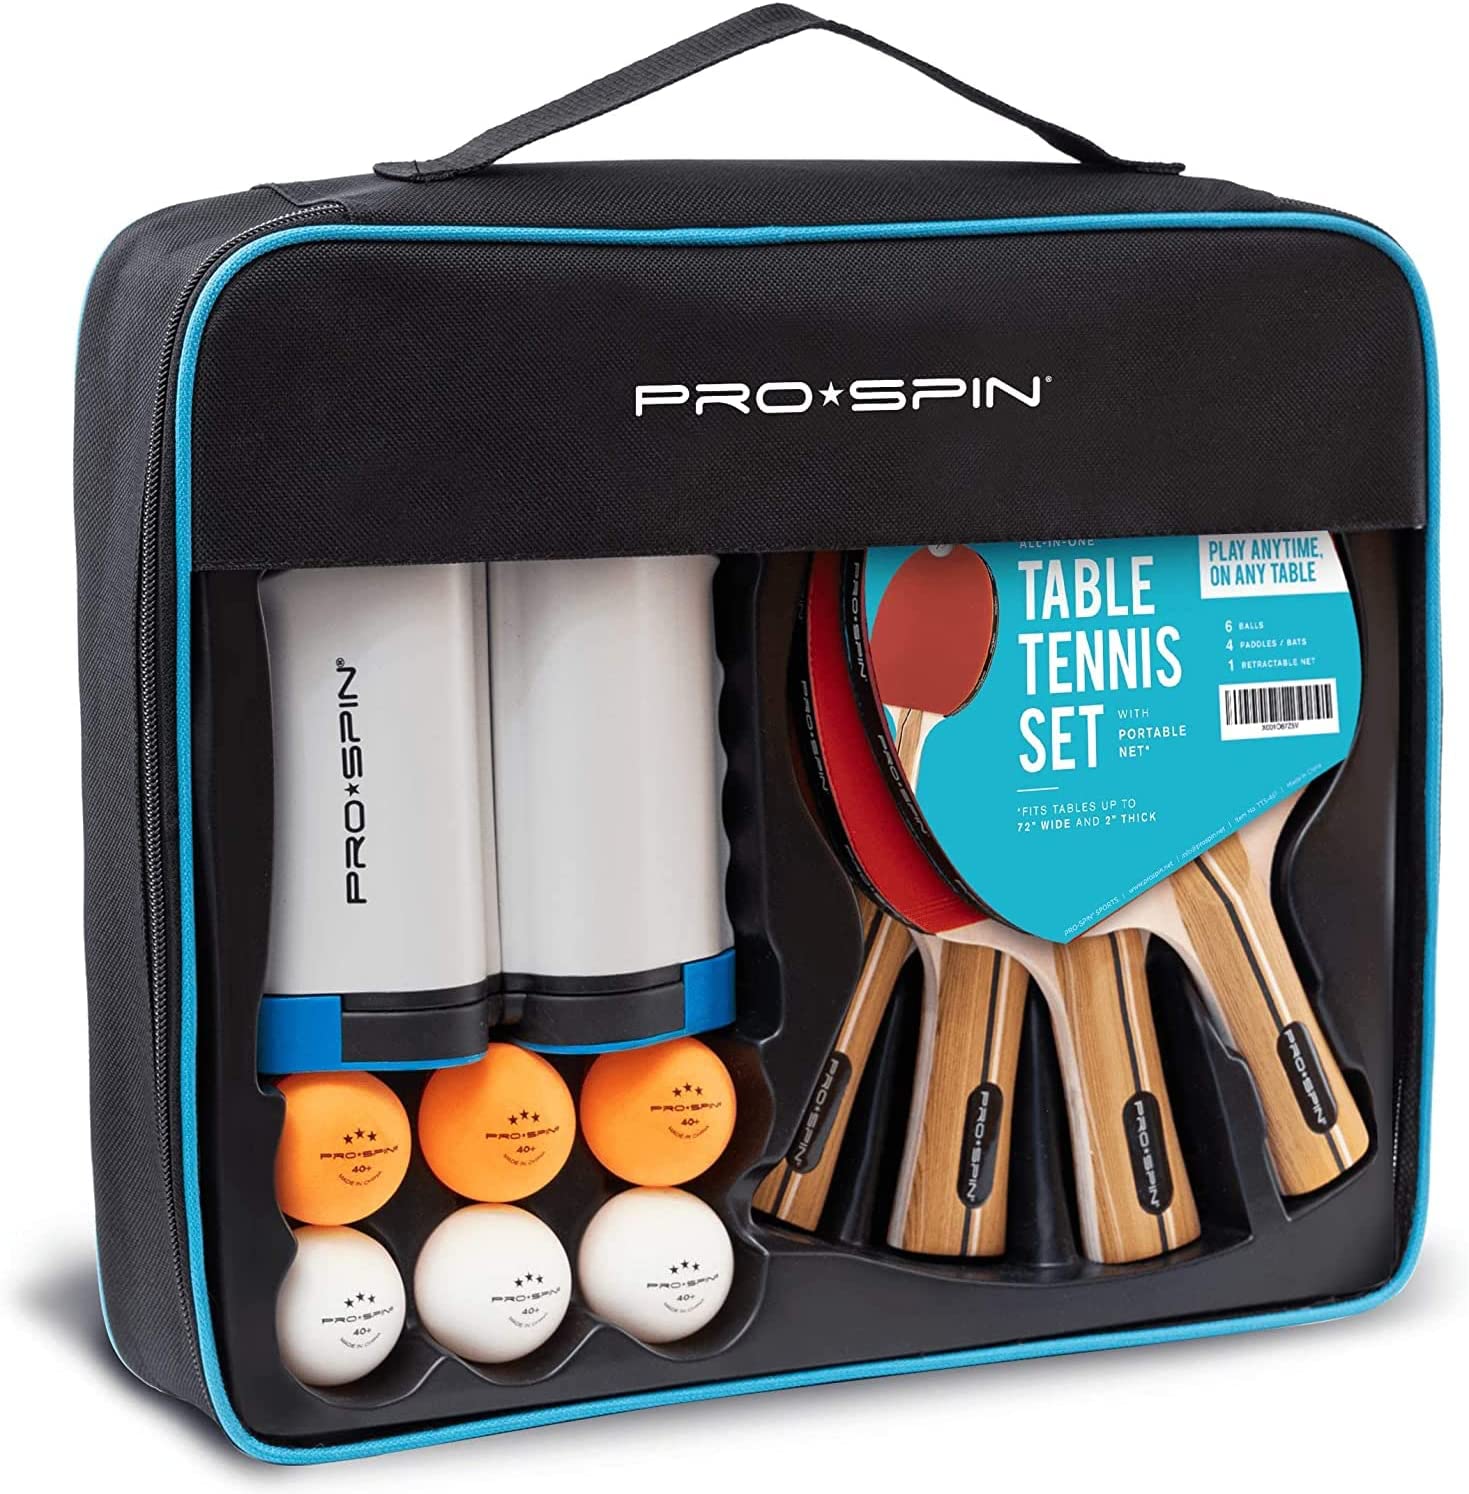 PRO-SPIN All-in-One Portable Ping Pong Paddles Set | Table Tennis Set with Retractable Ping Pong Net (Up to 72" Wide) | Premium Paddles, 3-Star Balls | Storage Case | Family Fun | Gift